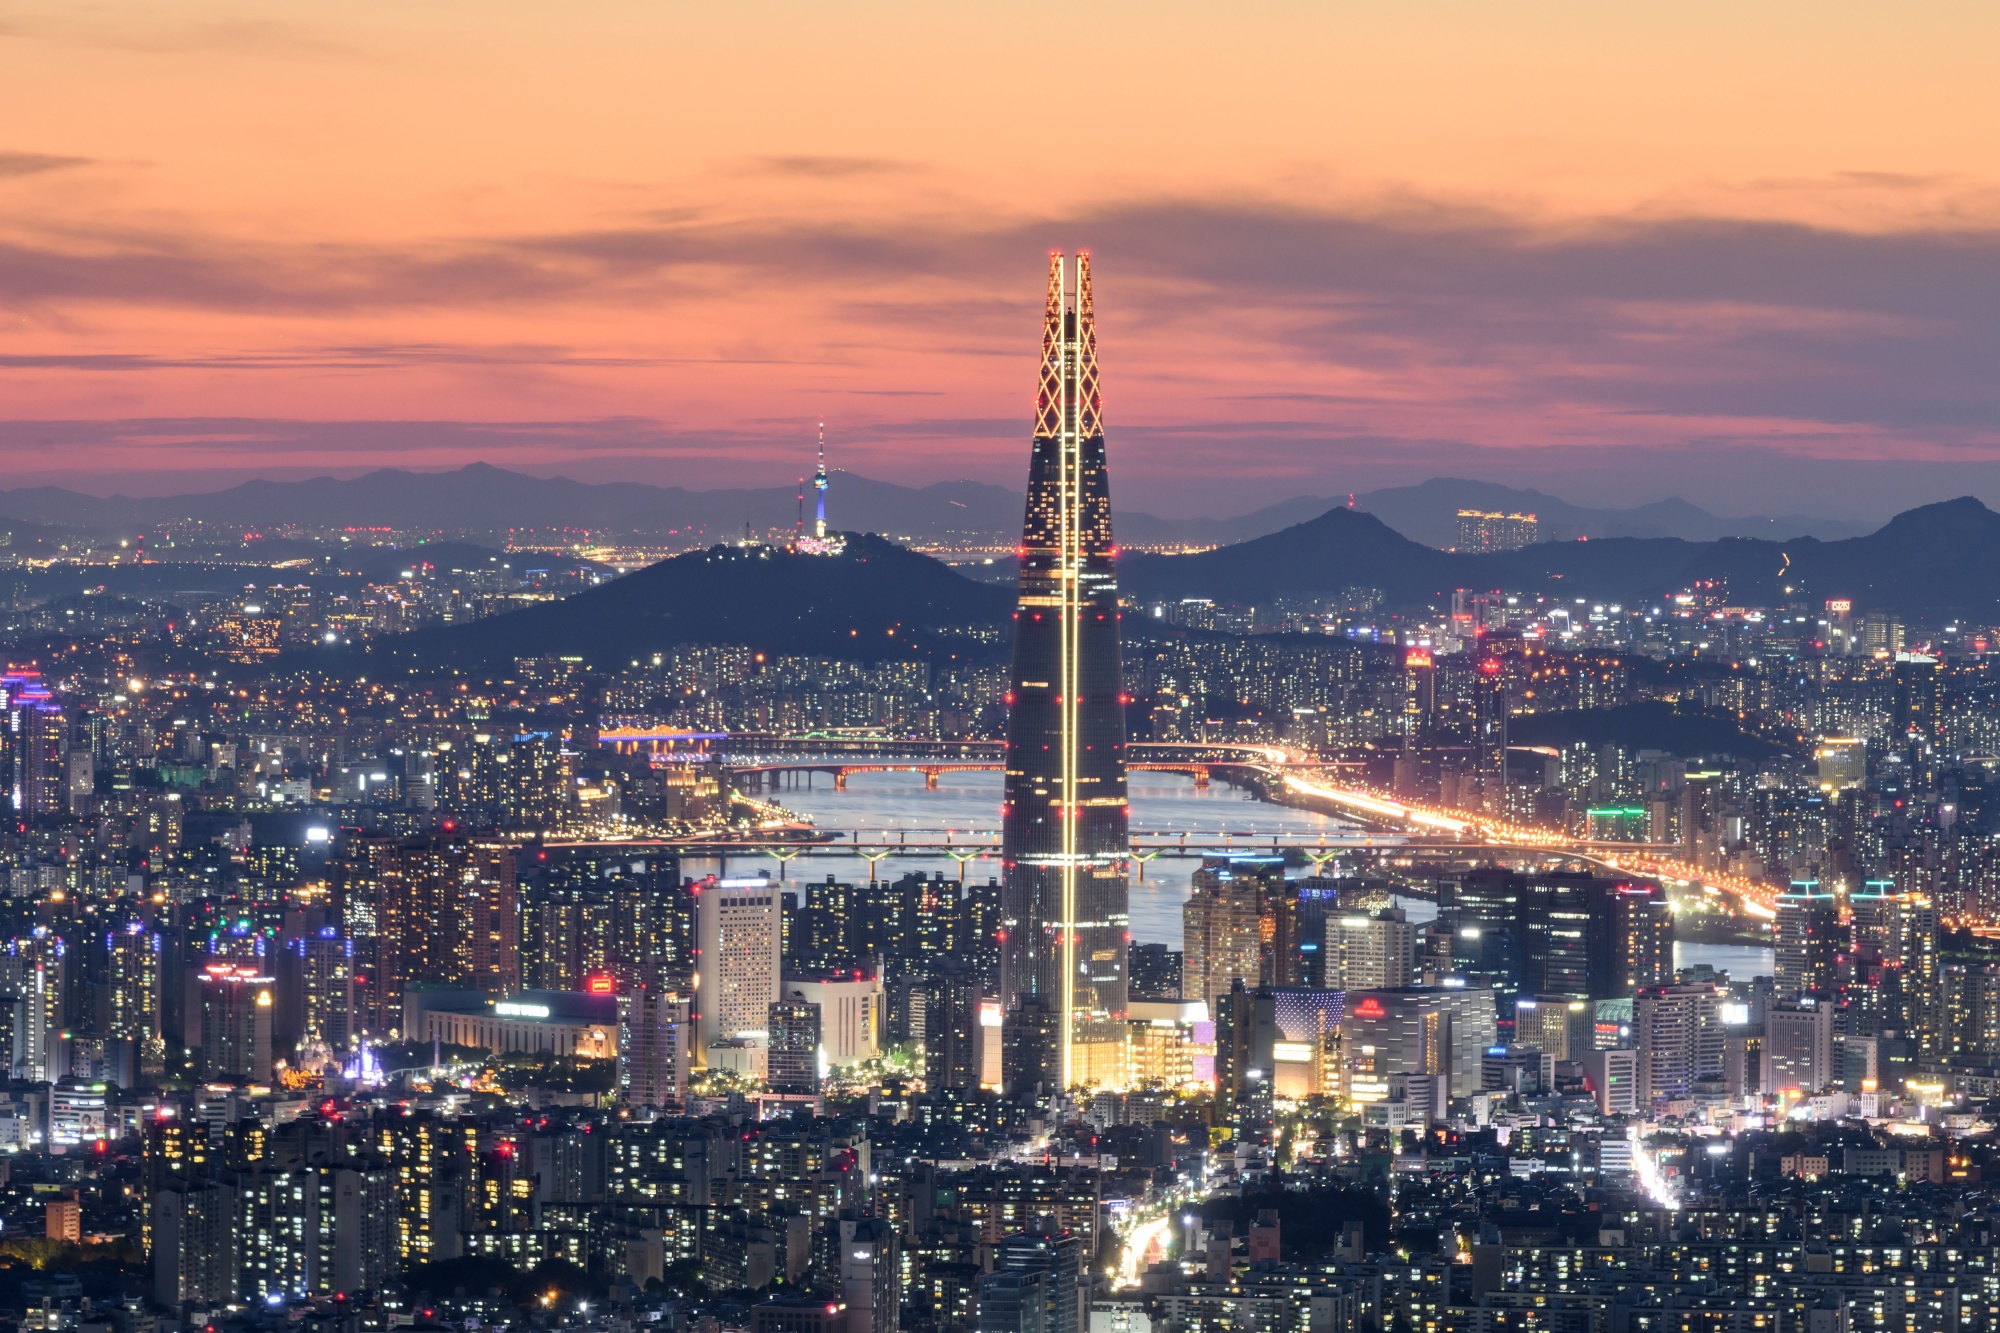 Seoul became the first major city to announce that it will enter the metaverse.&nbsp;